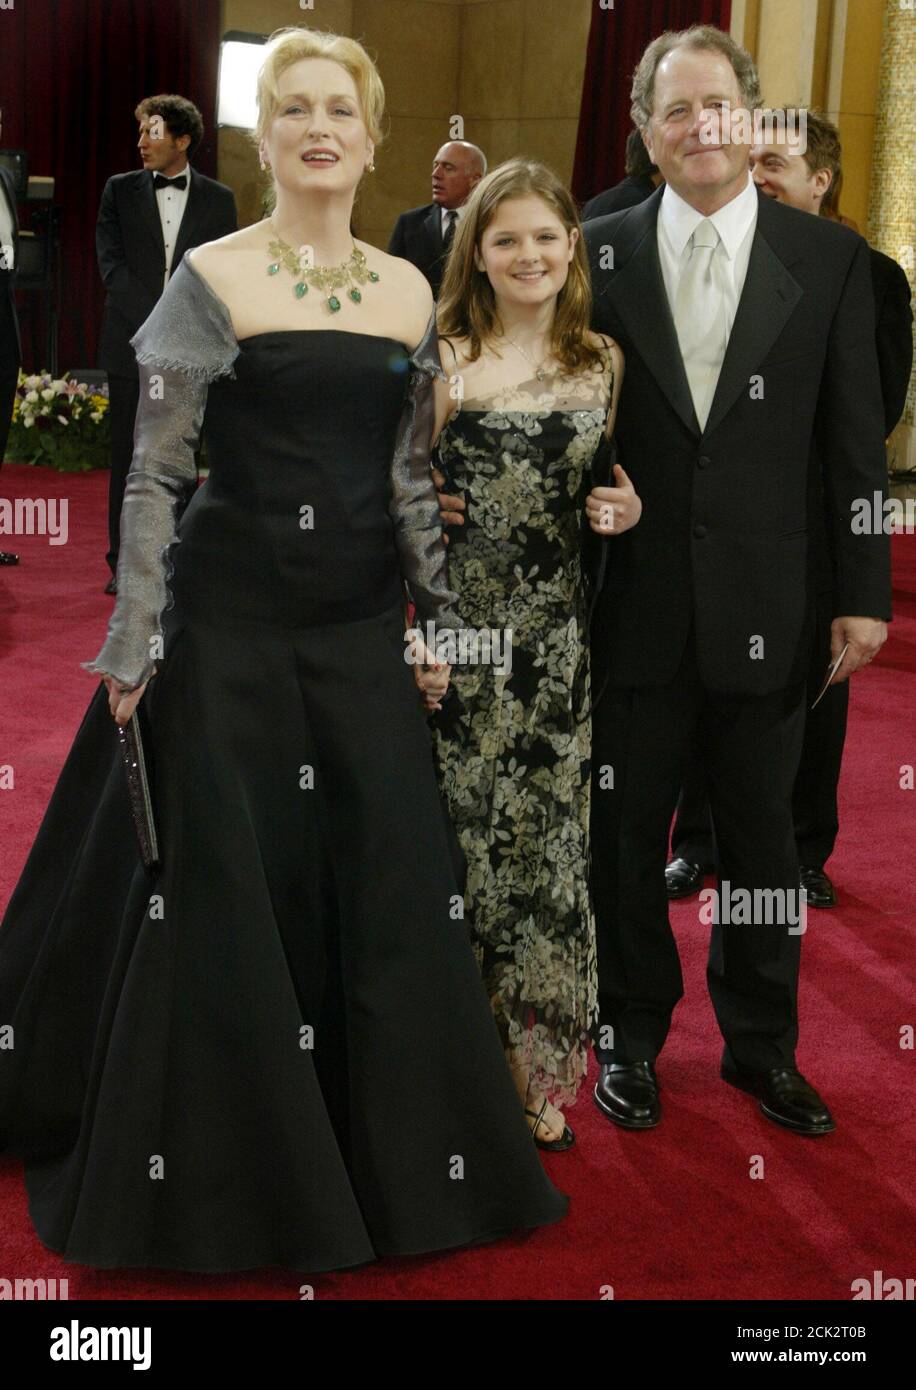 Actress Meryl Streep (L) arrives with her daughter Louisa (C) and her husband Donald Gummer at the 75th annual Academy Awards at the Kodak Theatre in Hollywood, California March 23, 2003. Streep's nomination for a best supporting actress Oscar for her role in 'Adaptation' makes her the most nominated performer in Academy history with 13. REUTERS/Fred Prouser  BS Stock Photo